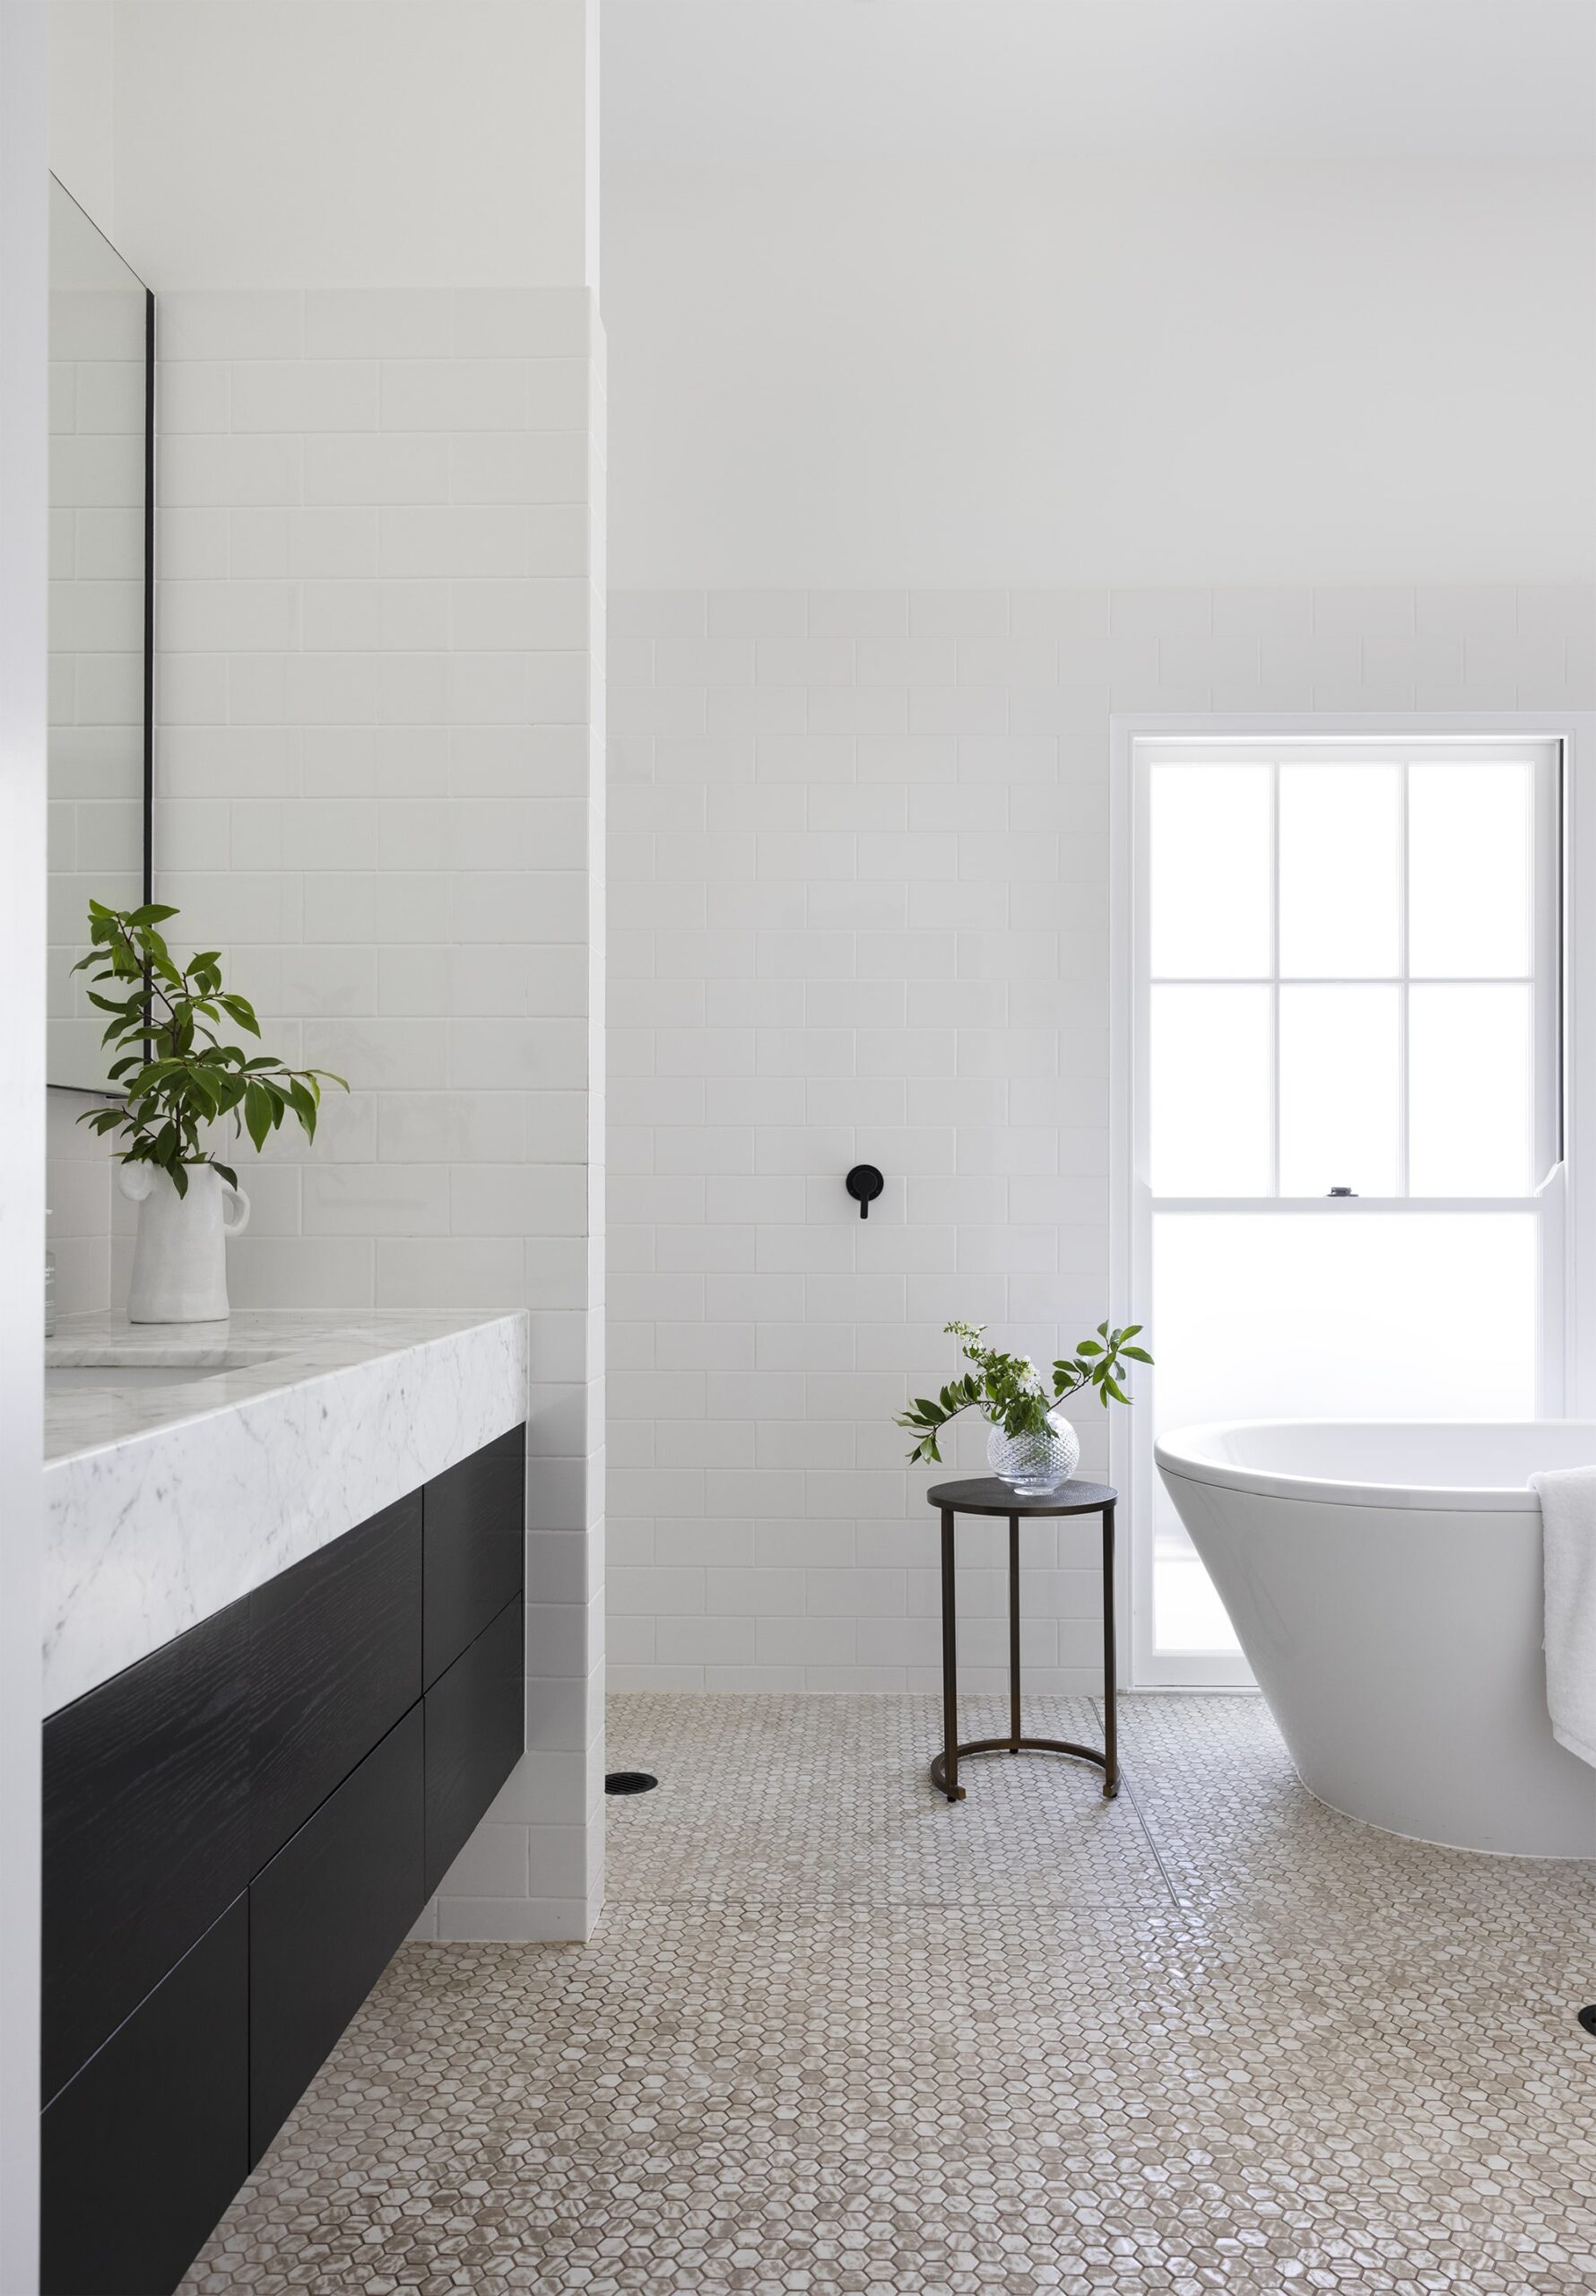 Modern bathroom with white subway tiles, marble countertop vanity, dark cabinetry, marble mosaic floor, and a free-standing bathtub by a window, accented with green plants.